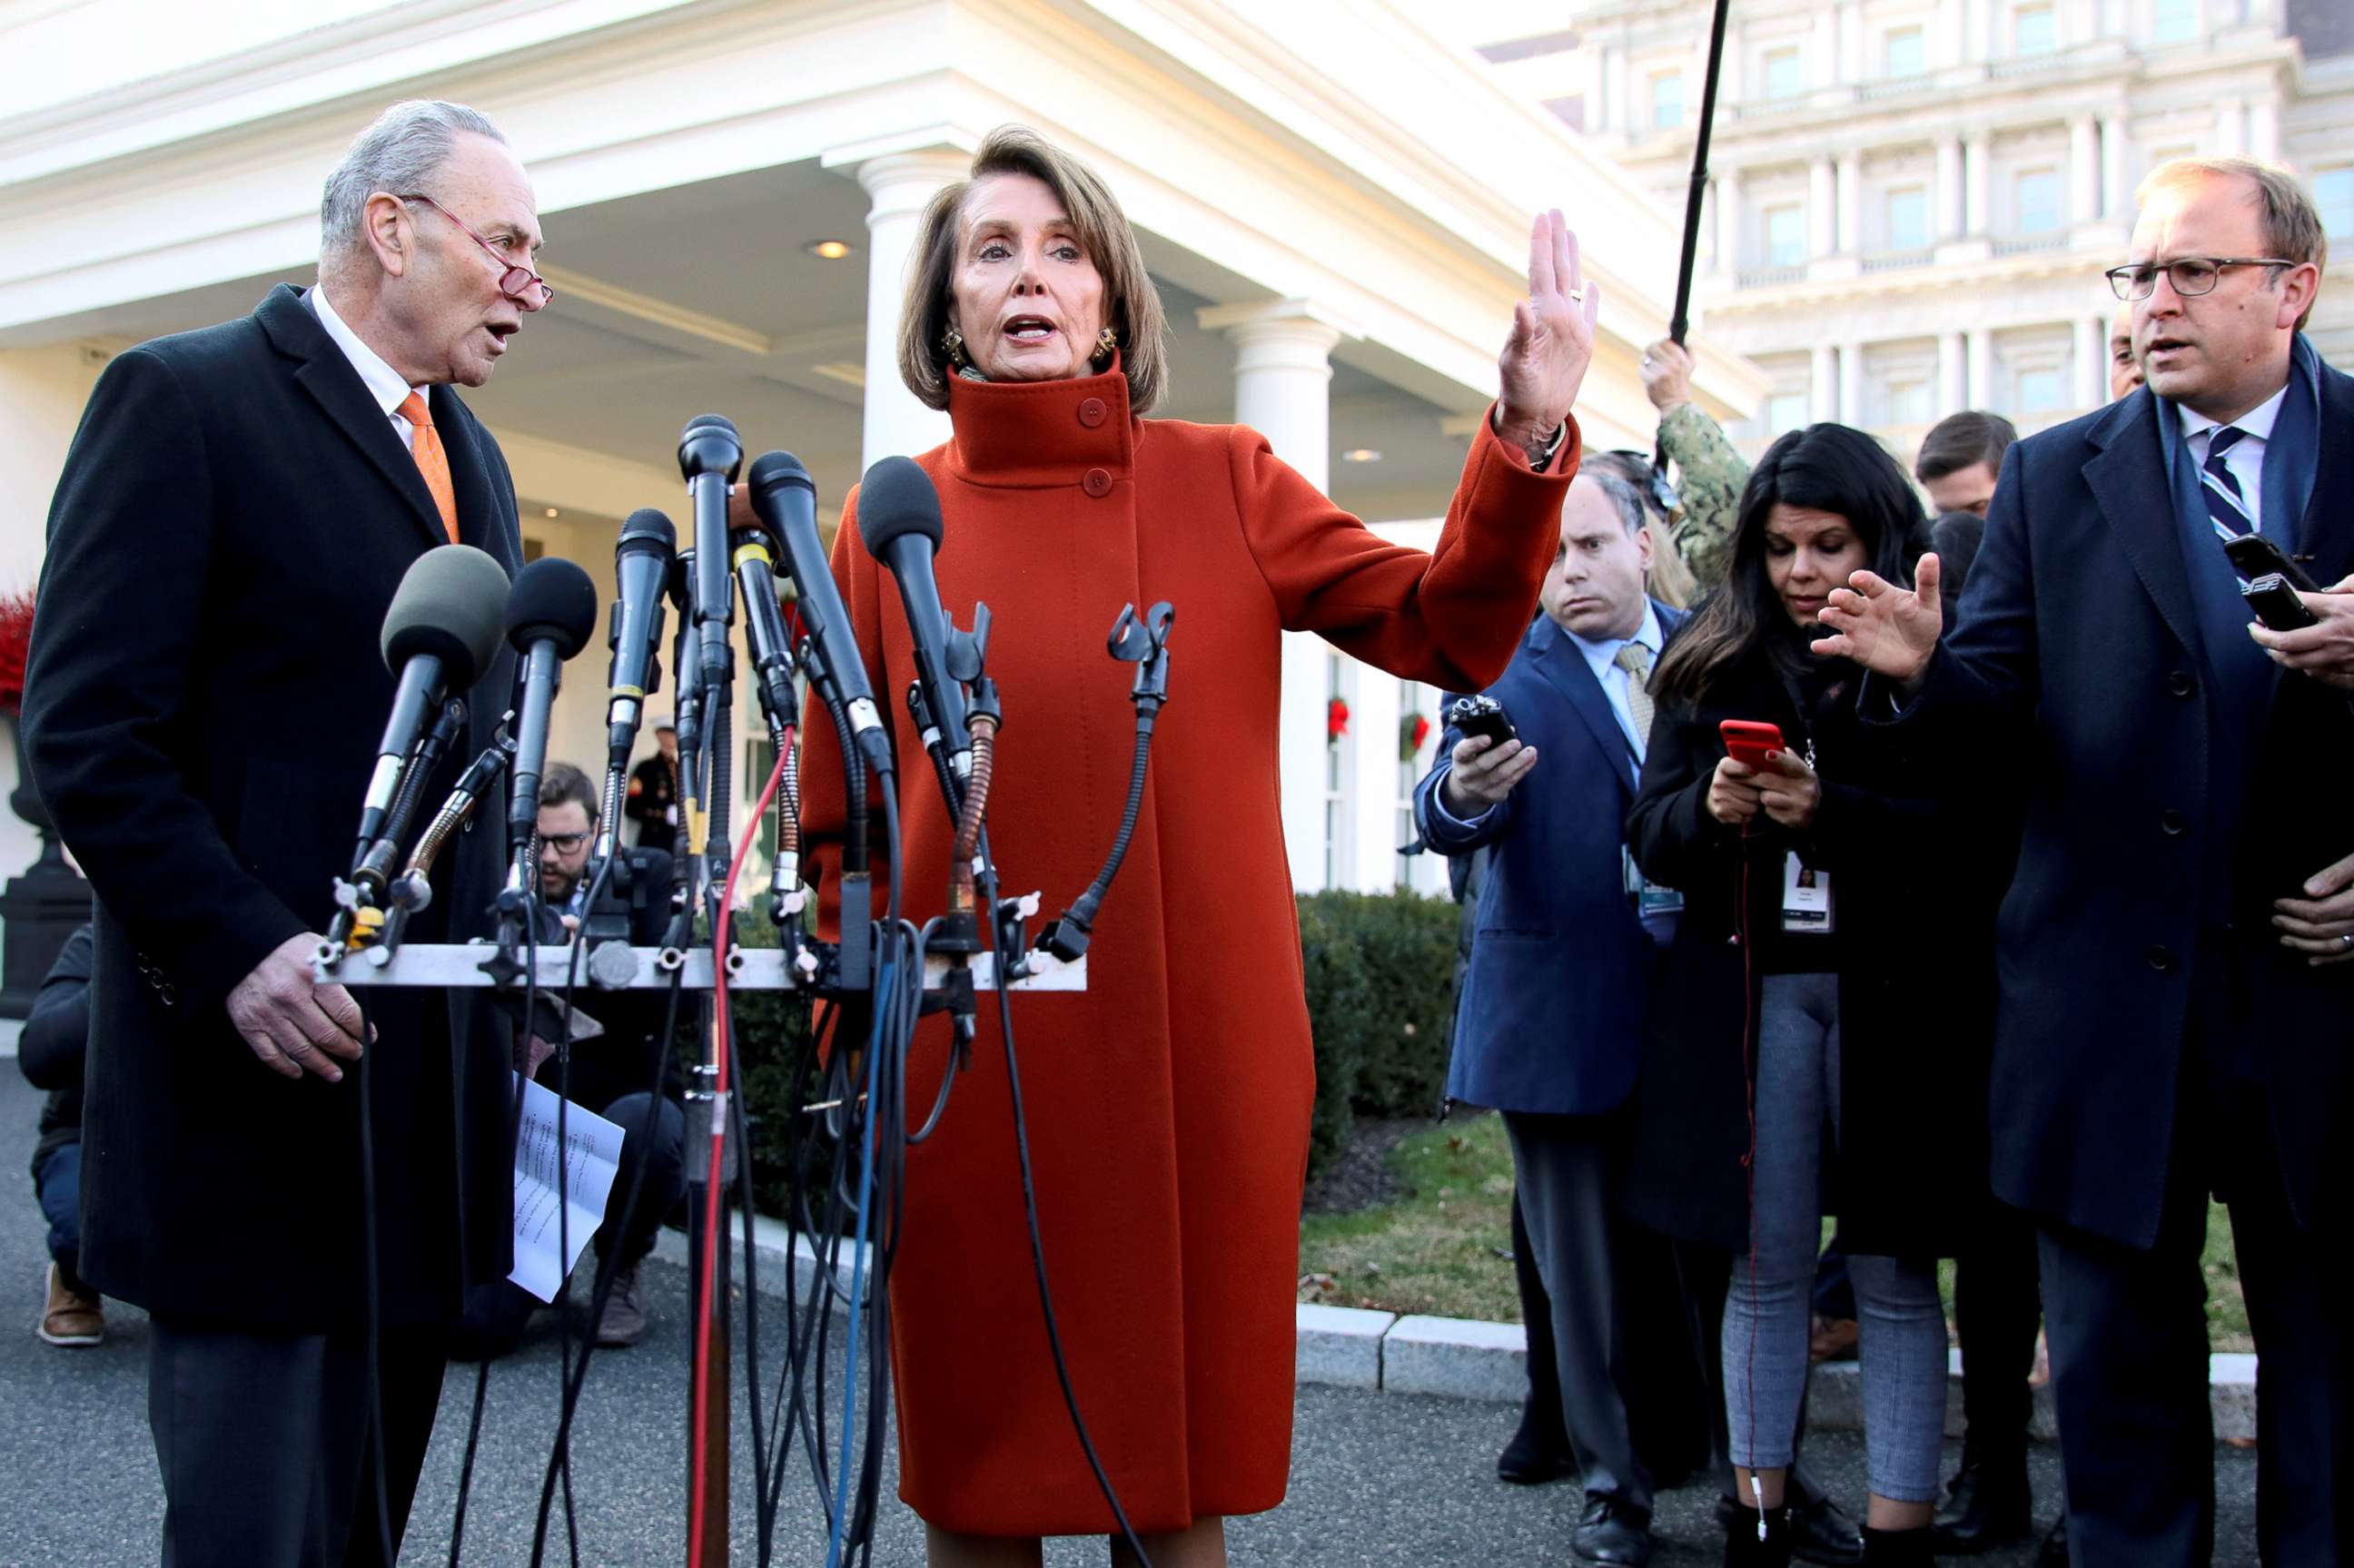 PHOTO: U.S. Senate Minority Leader Chuck Schumer and House Speaker designate Nancy Pelosi speak to reporters after meeting with President Donald Trump at the White House in Washington, Dec. 11, 2018.